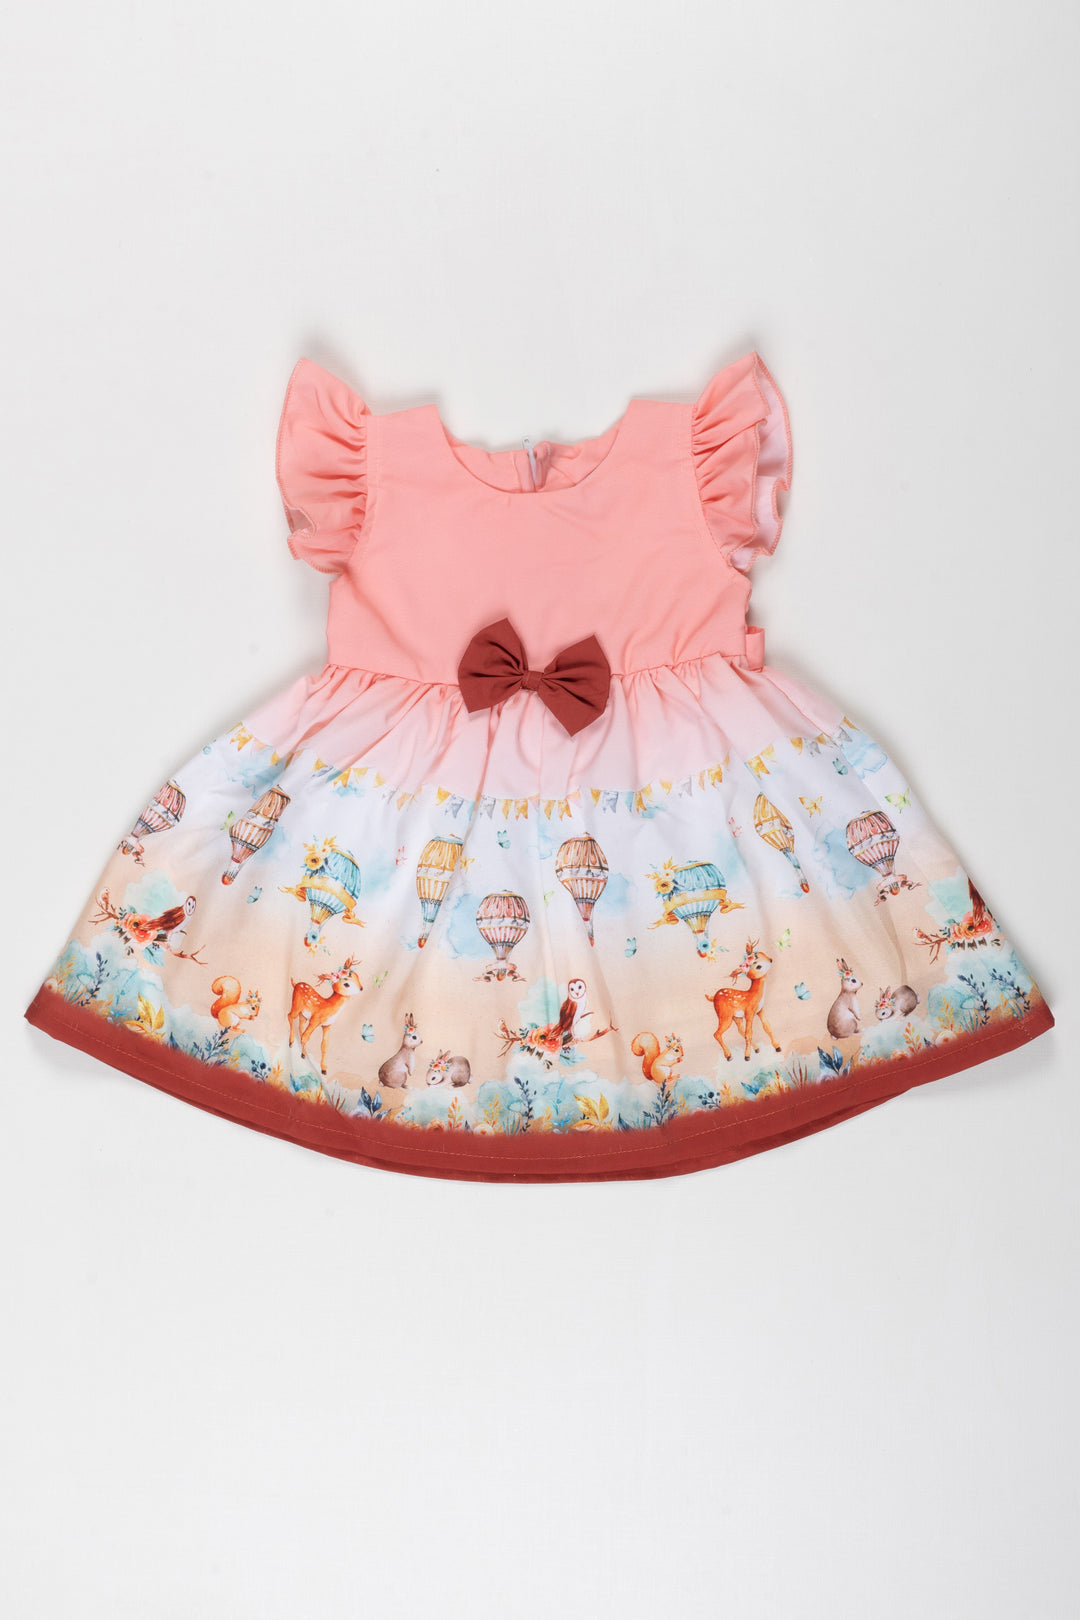 The Nesavu Baby Fancy Frock Enchanted Forest Adventure Baby Girl Frock with Hot Air Balloon Imagery Nesavu 14 (6M) / Pink / Poly Crepe BFJ545A-14 Discover the Magic of Storytime with Our Woodland Balloon Baby Frock | The Nesavu